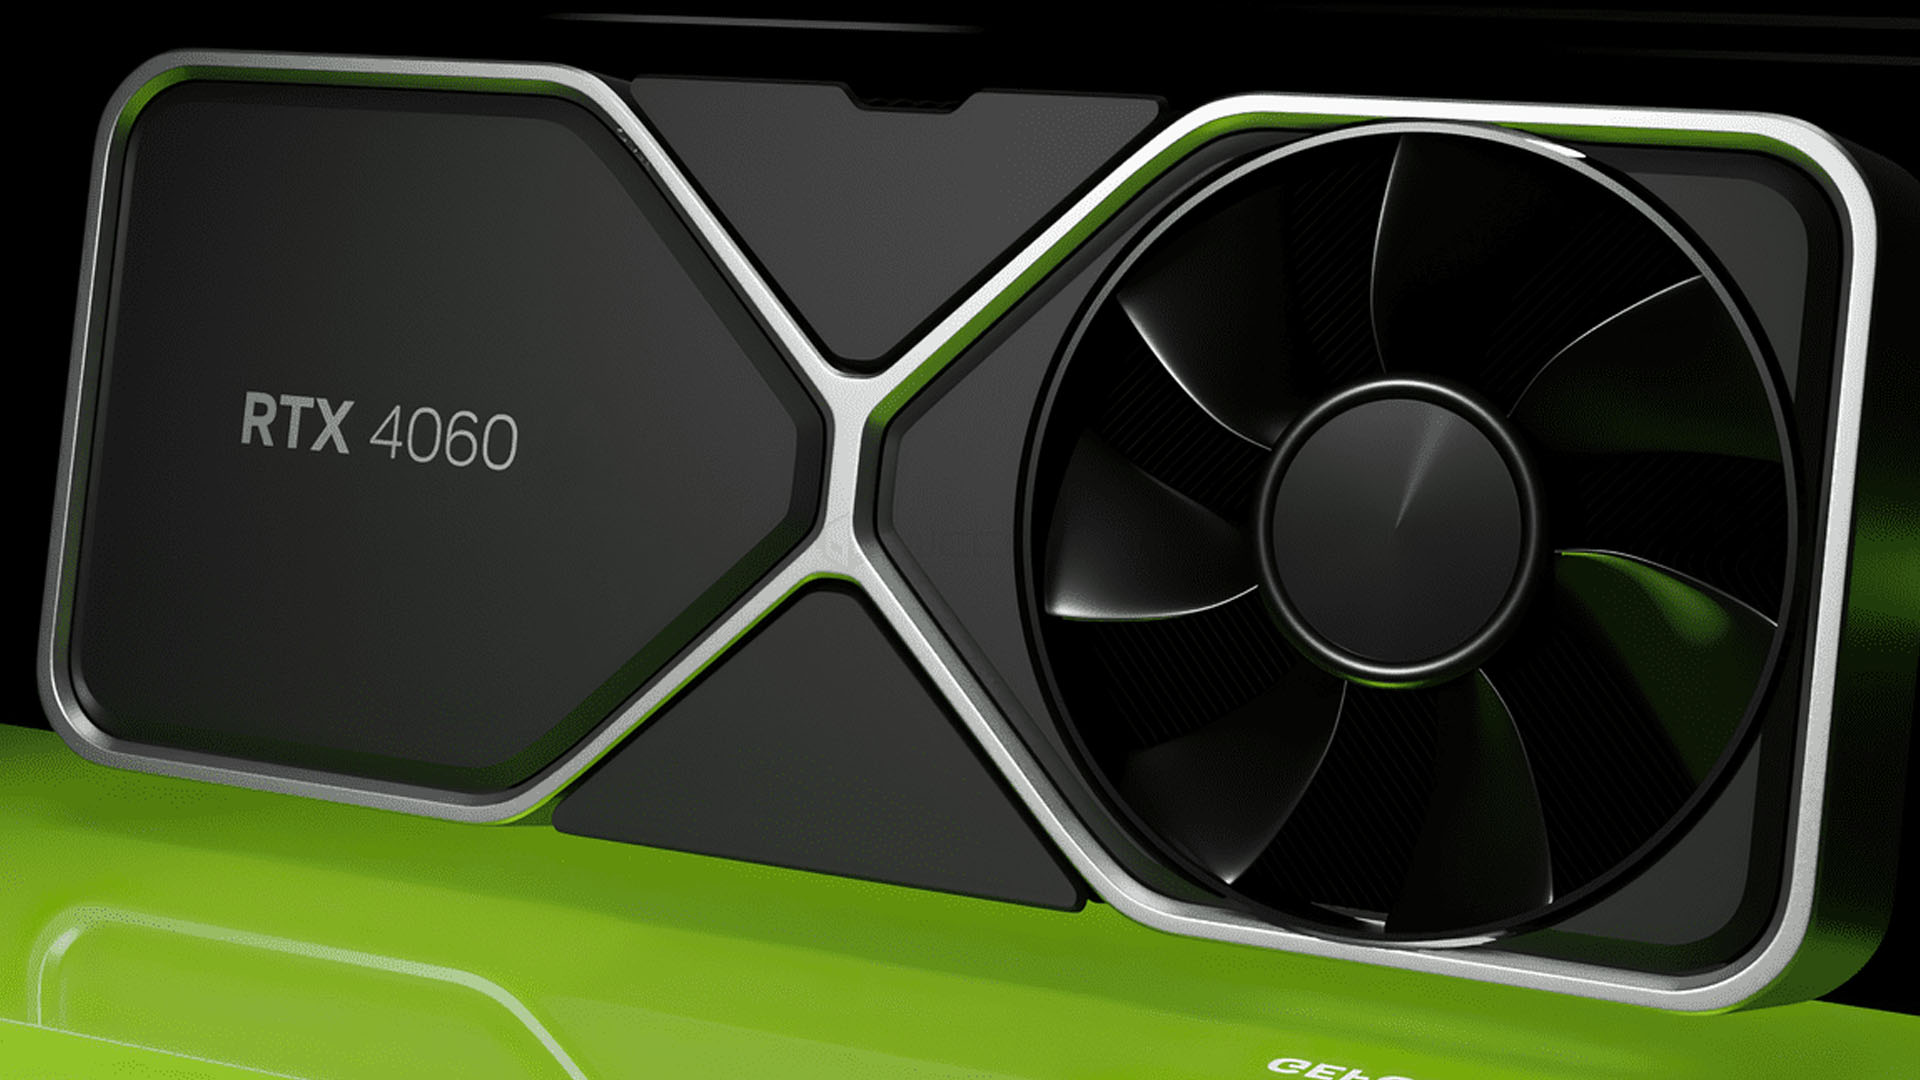 The Nvidia RTX 4060 release date may arrive sooner than expected